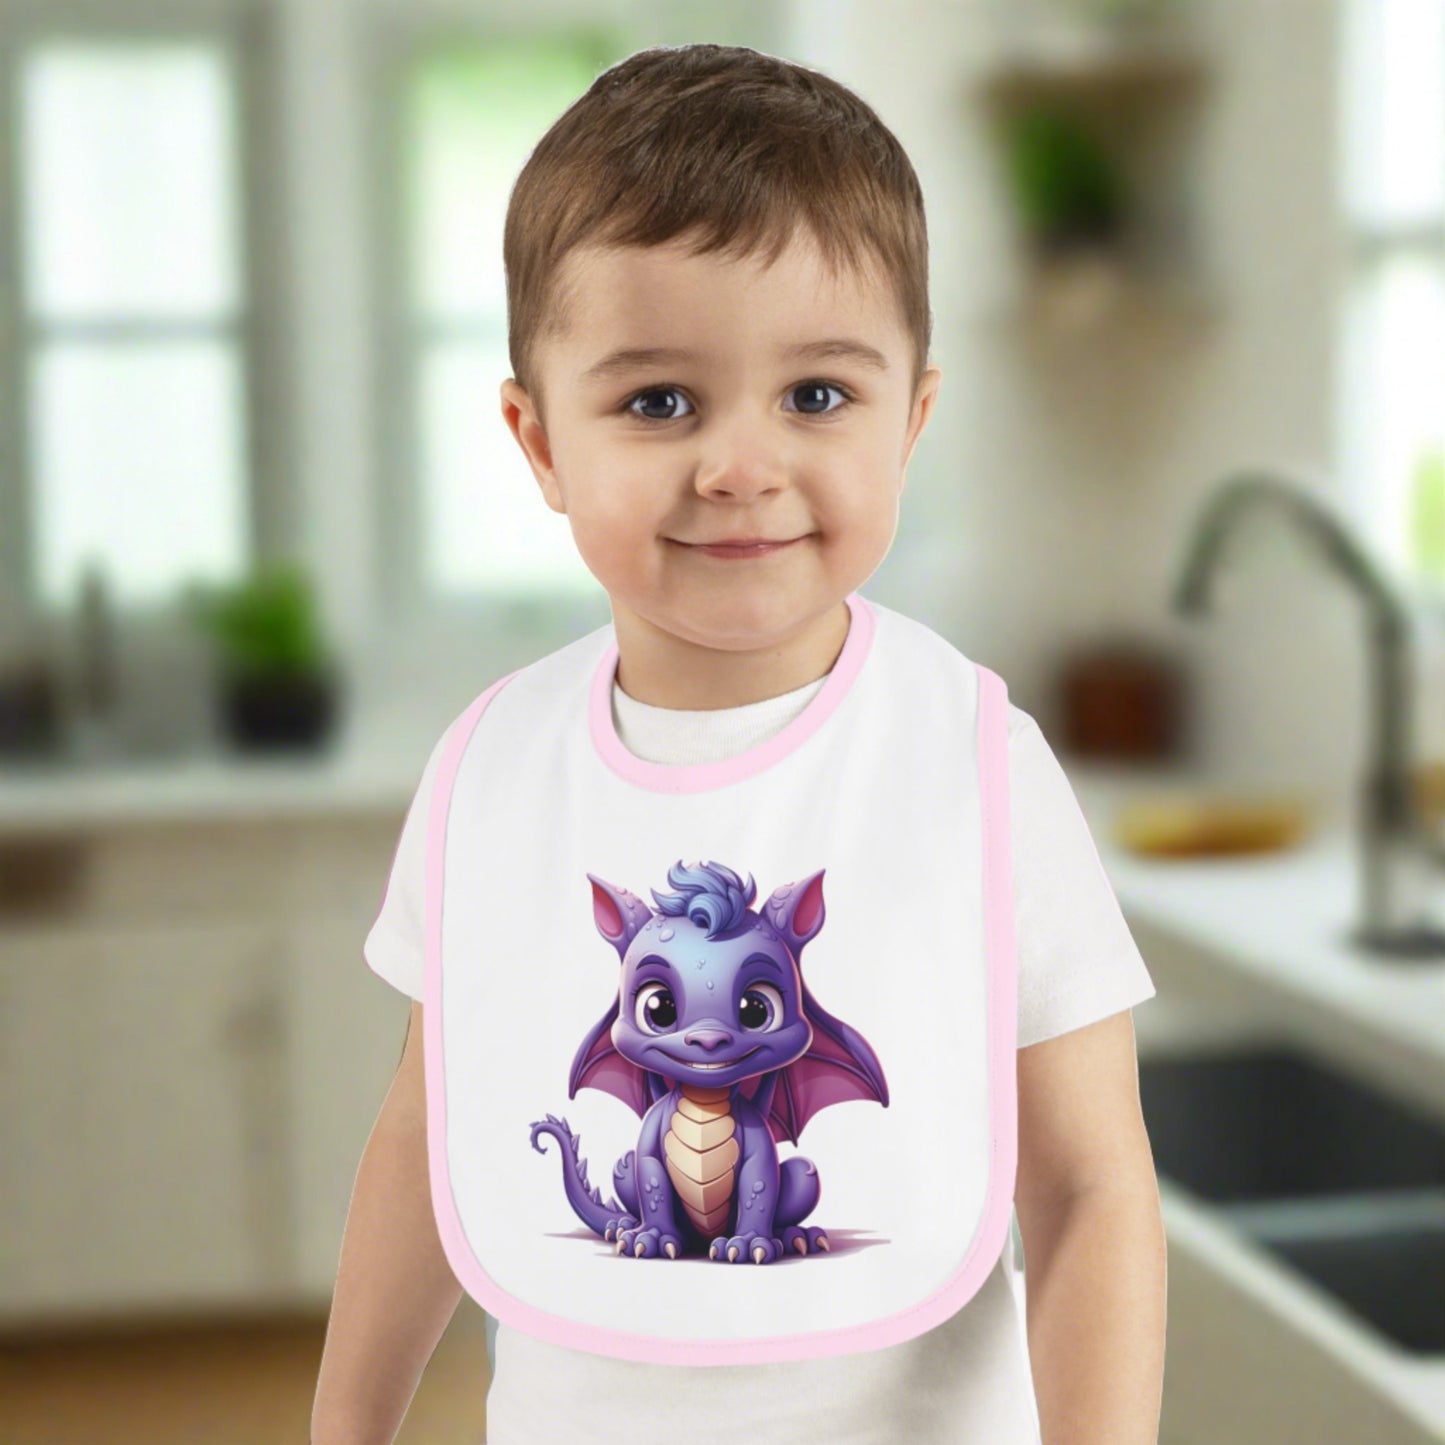 A white 100% cotton baby bib trimmed in pink - with a purple baby Happy dragon in the center - a large bib super cute.